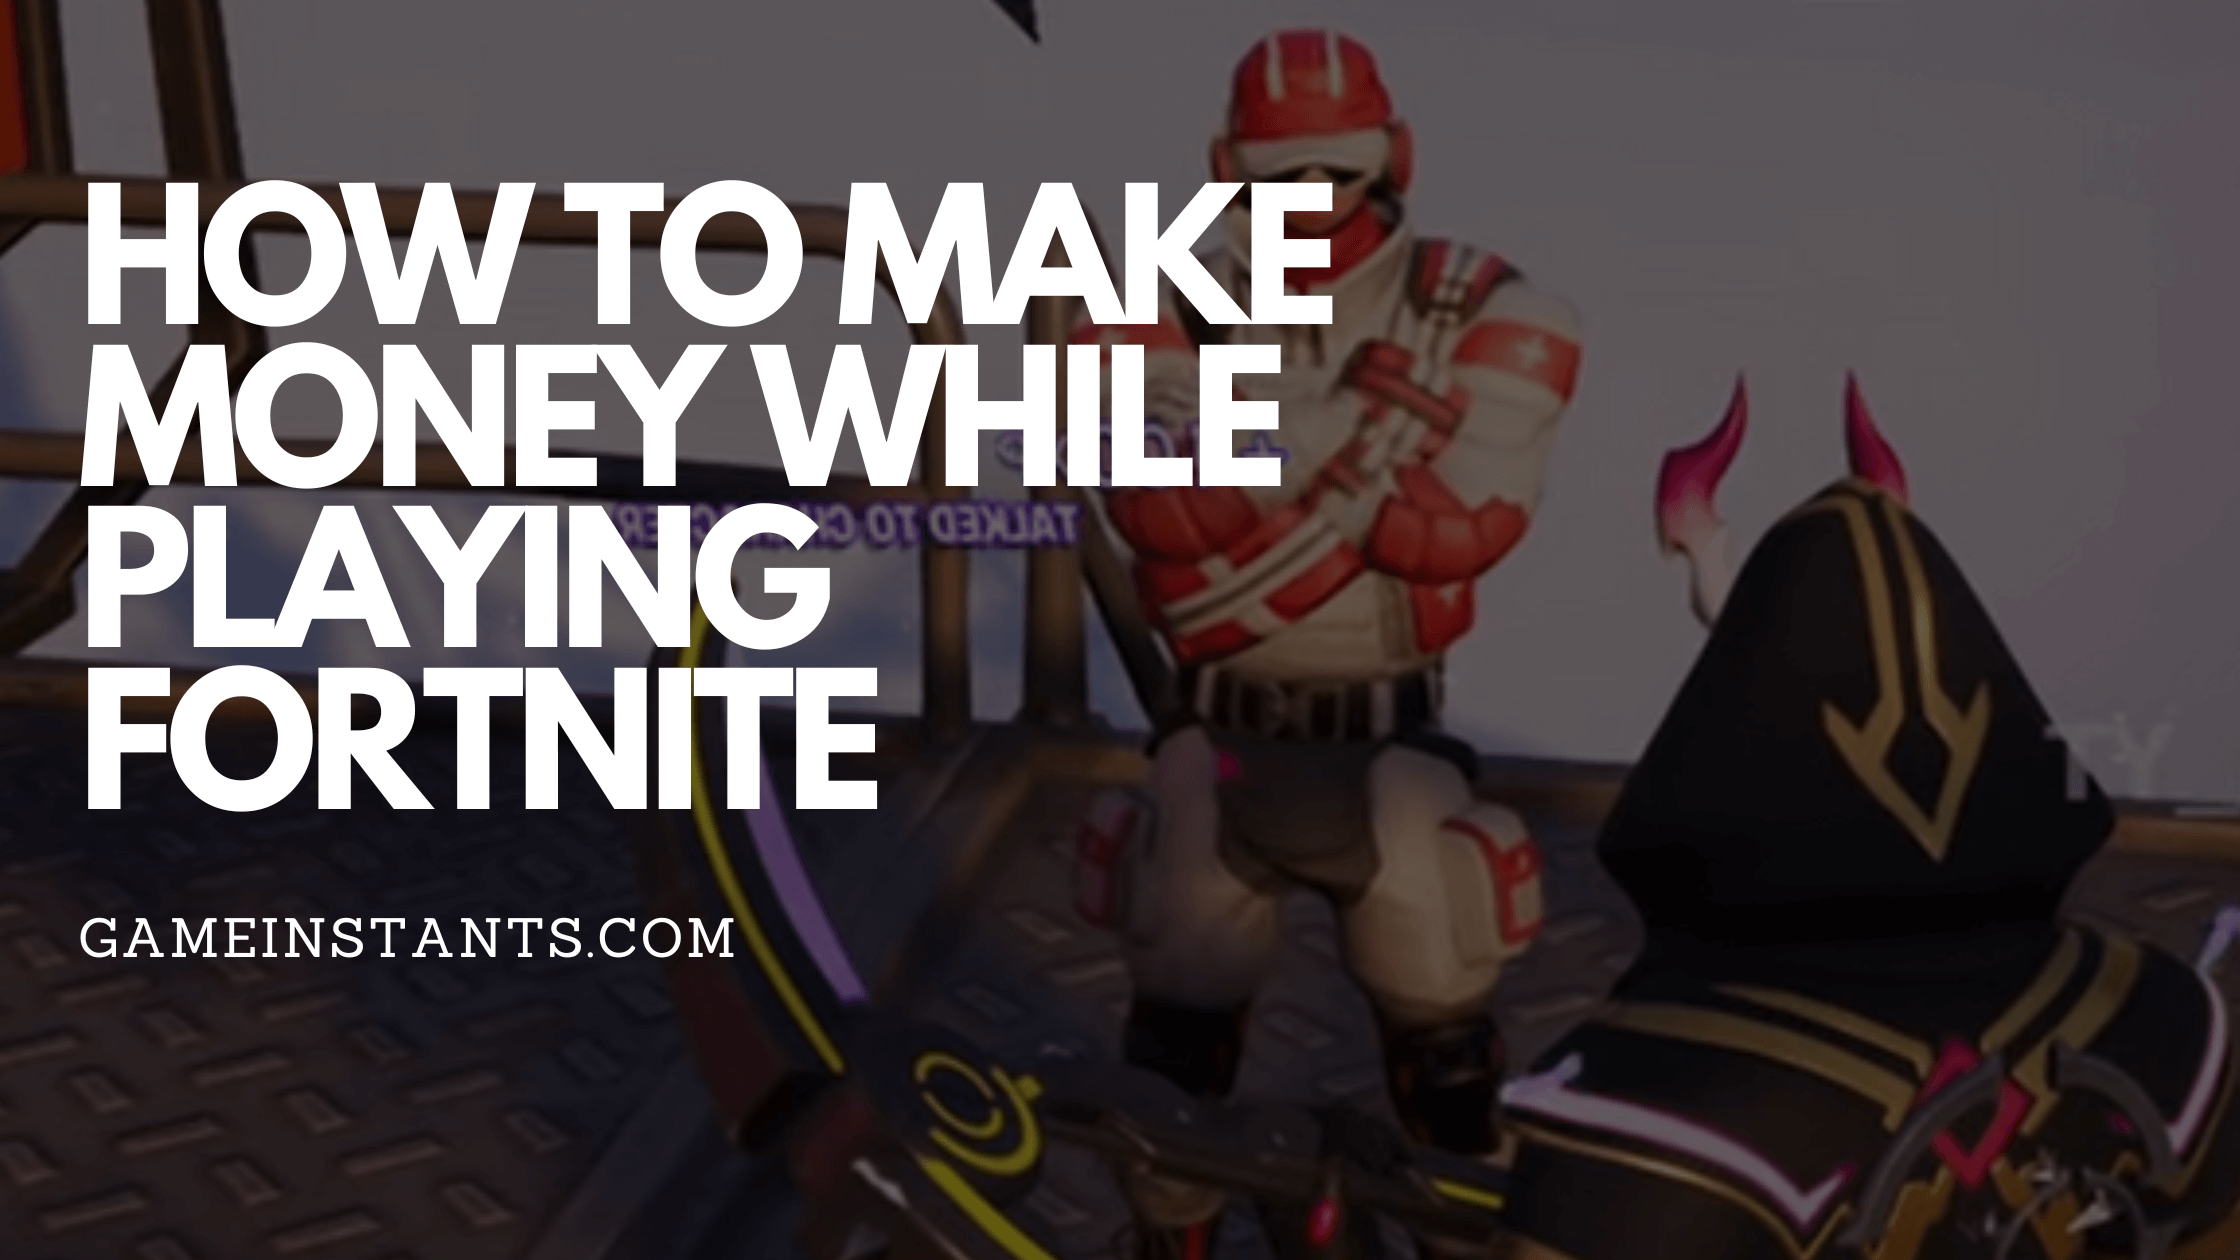 How To Make Money While Playing Fortnite